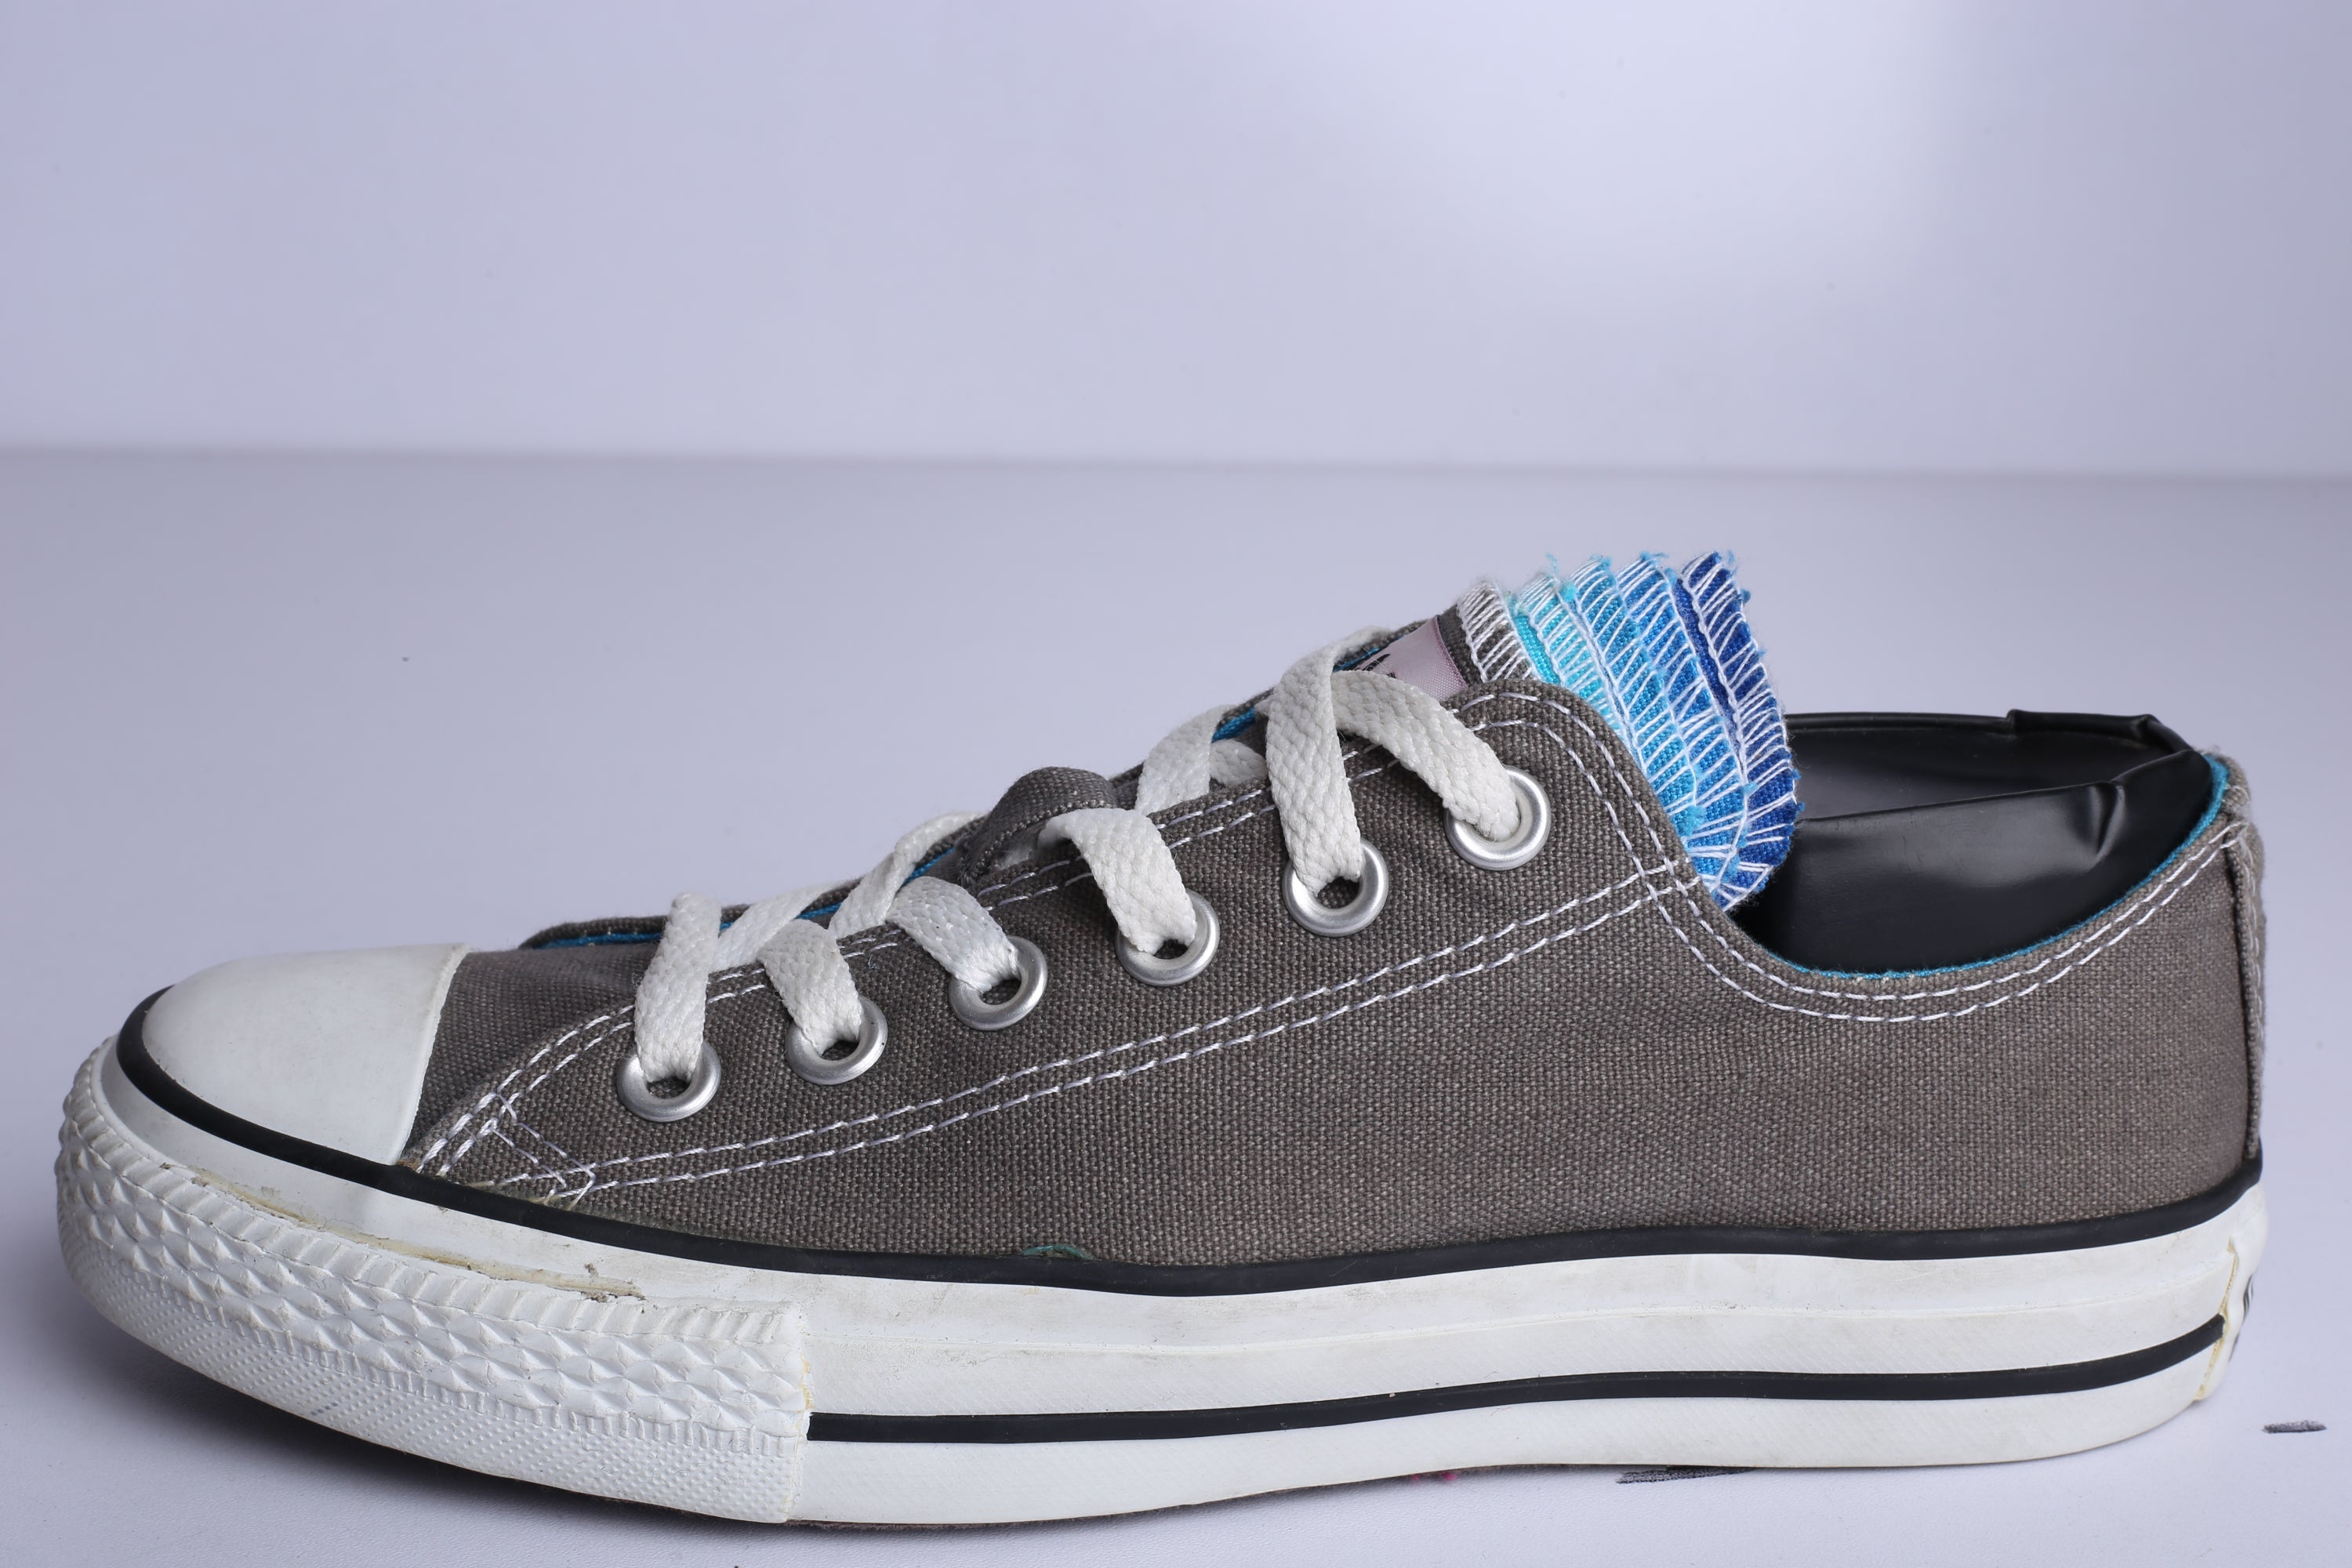 Chuck Taylor All Star Low Grey/Blue Sneaker - (Condition Premium)